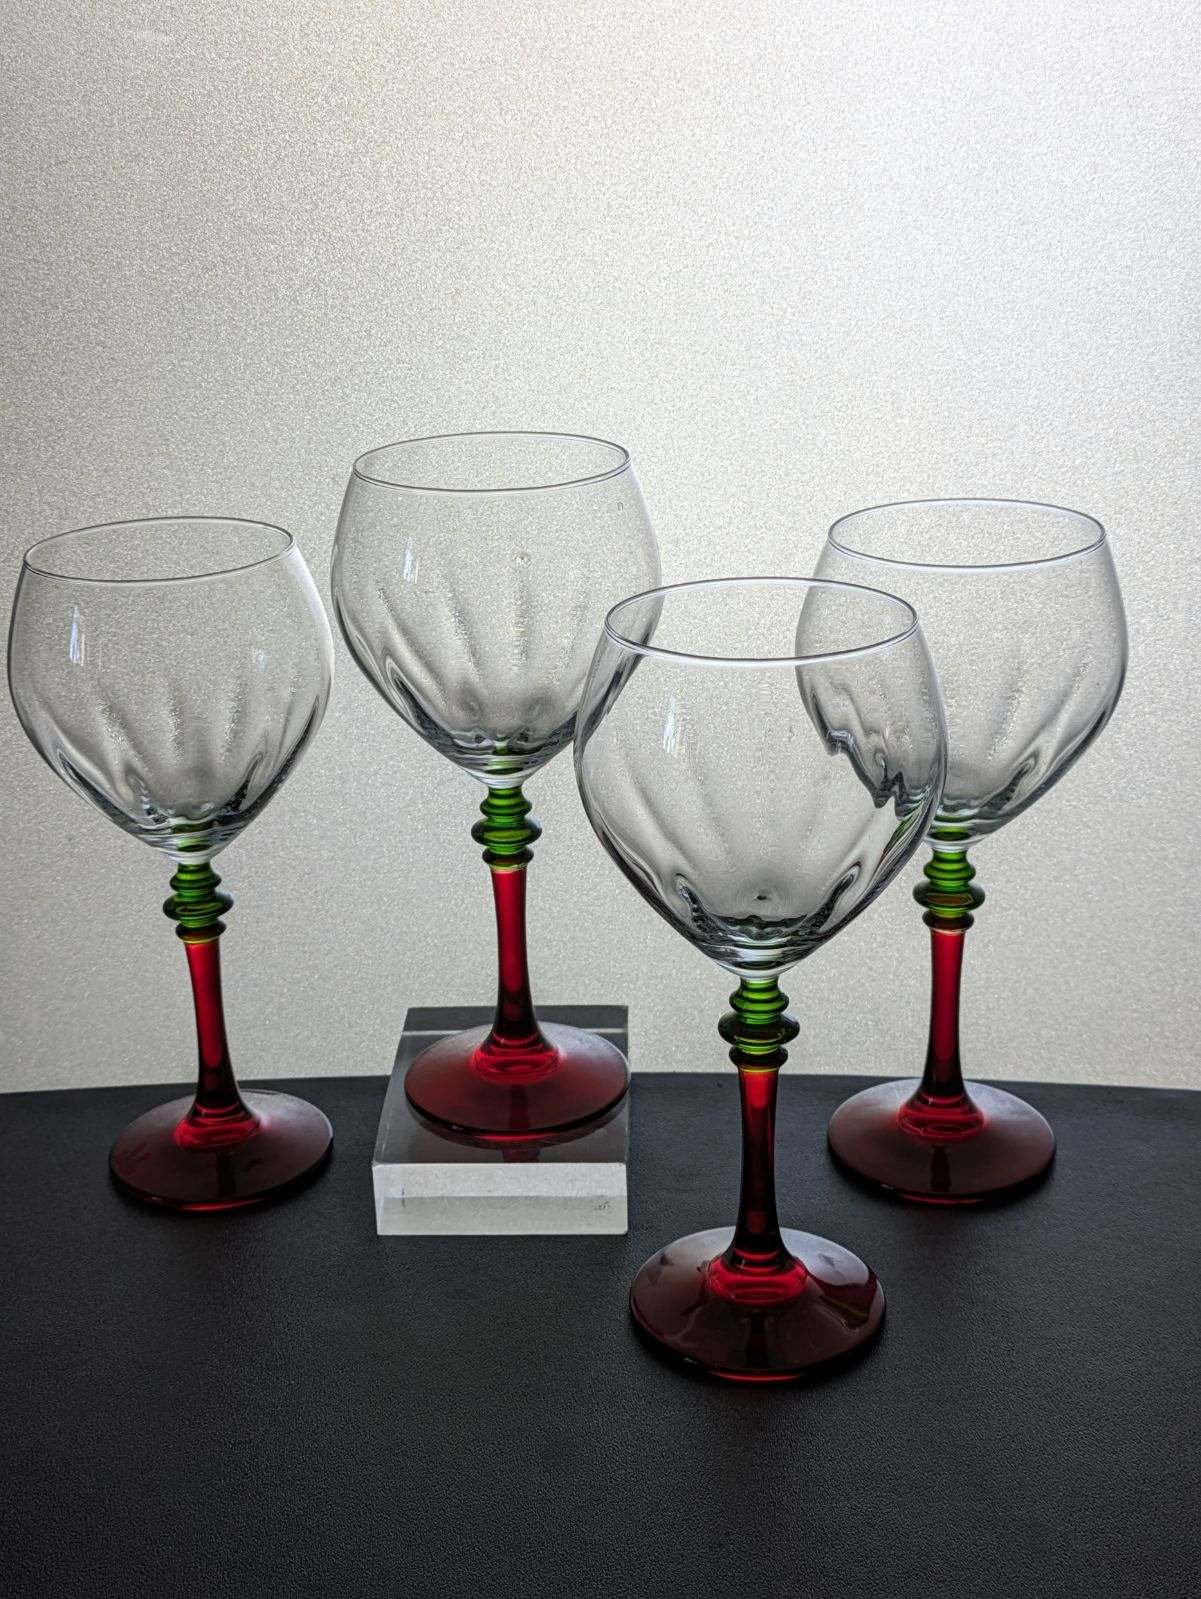  WHOLE HOUSEWARES, Champagne Flute Set of 4, Hand Blown  Italian Style Crystal Clear Glass with Stem